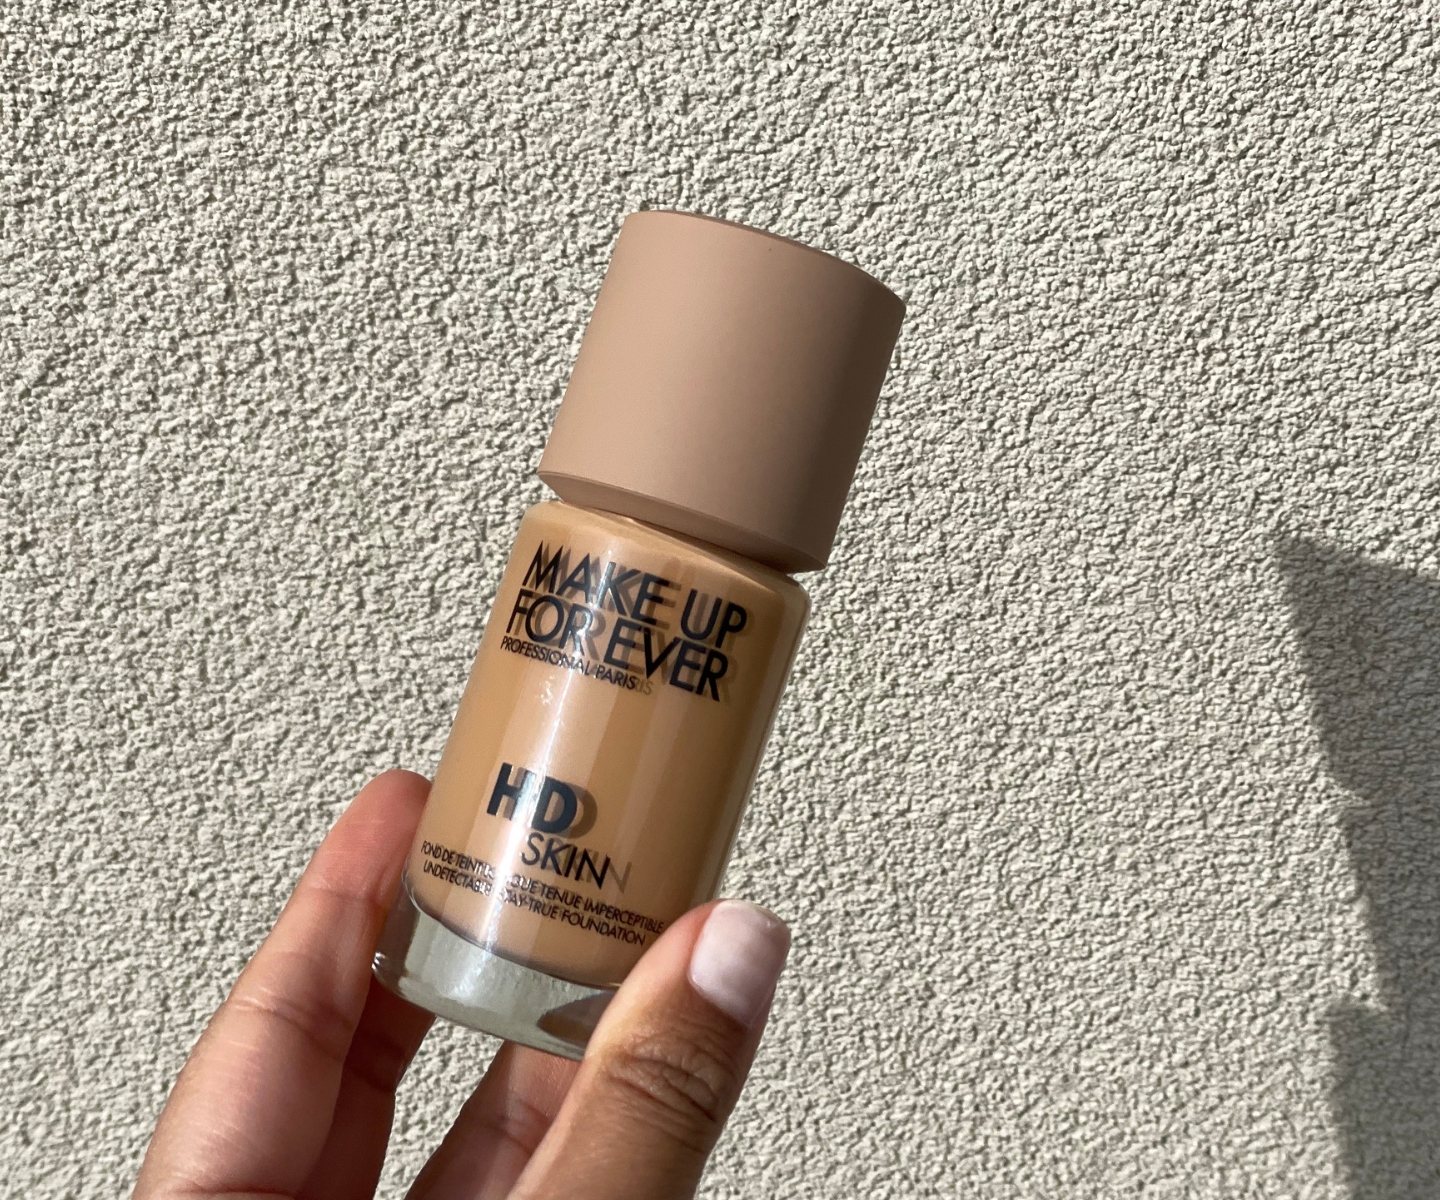 Make Up for Ever HD Skin Foundation 3N42 30ml